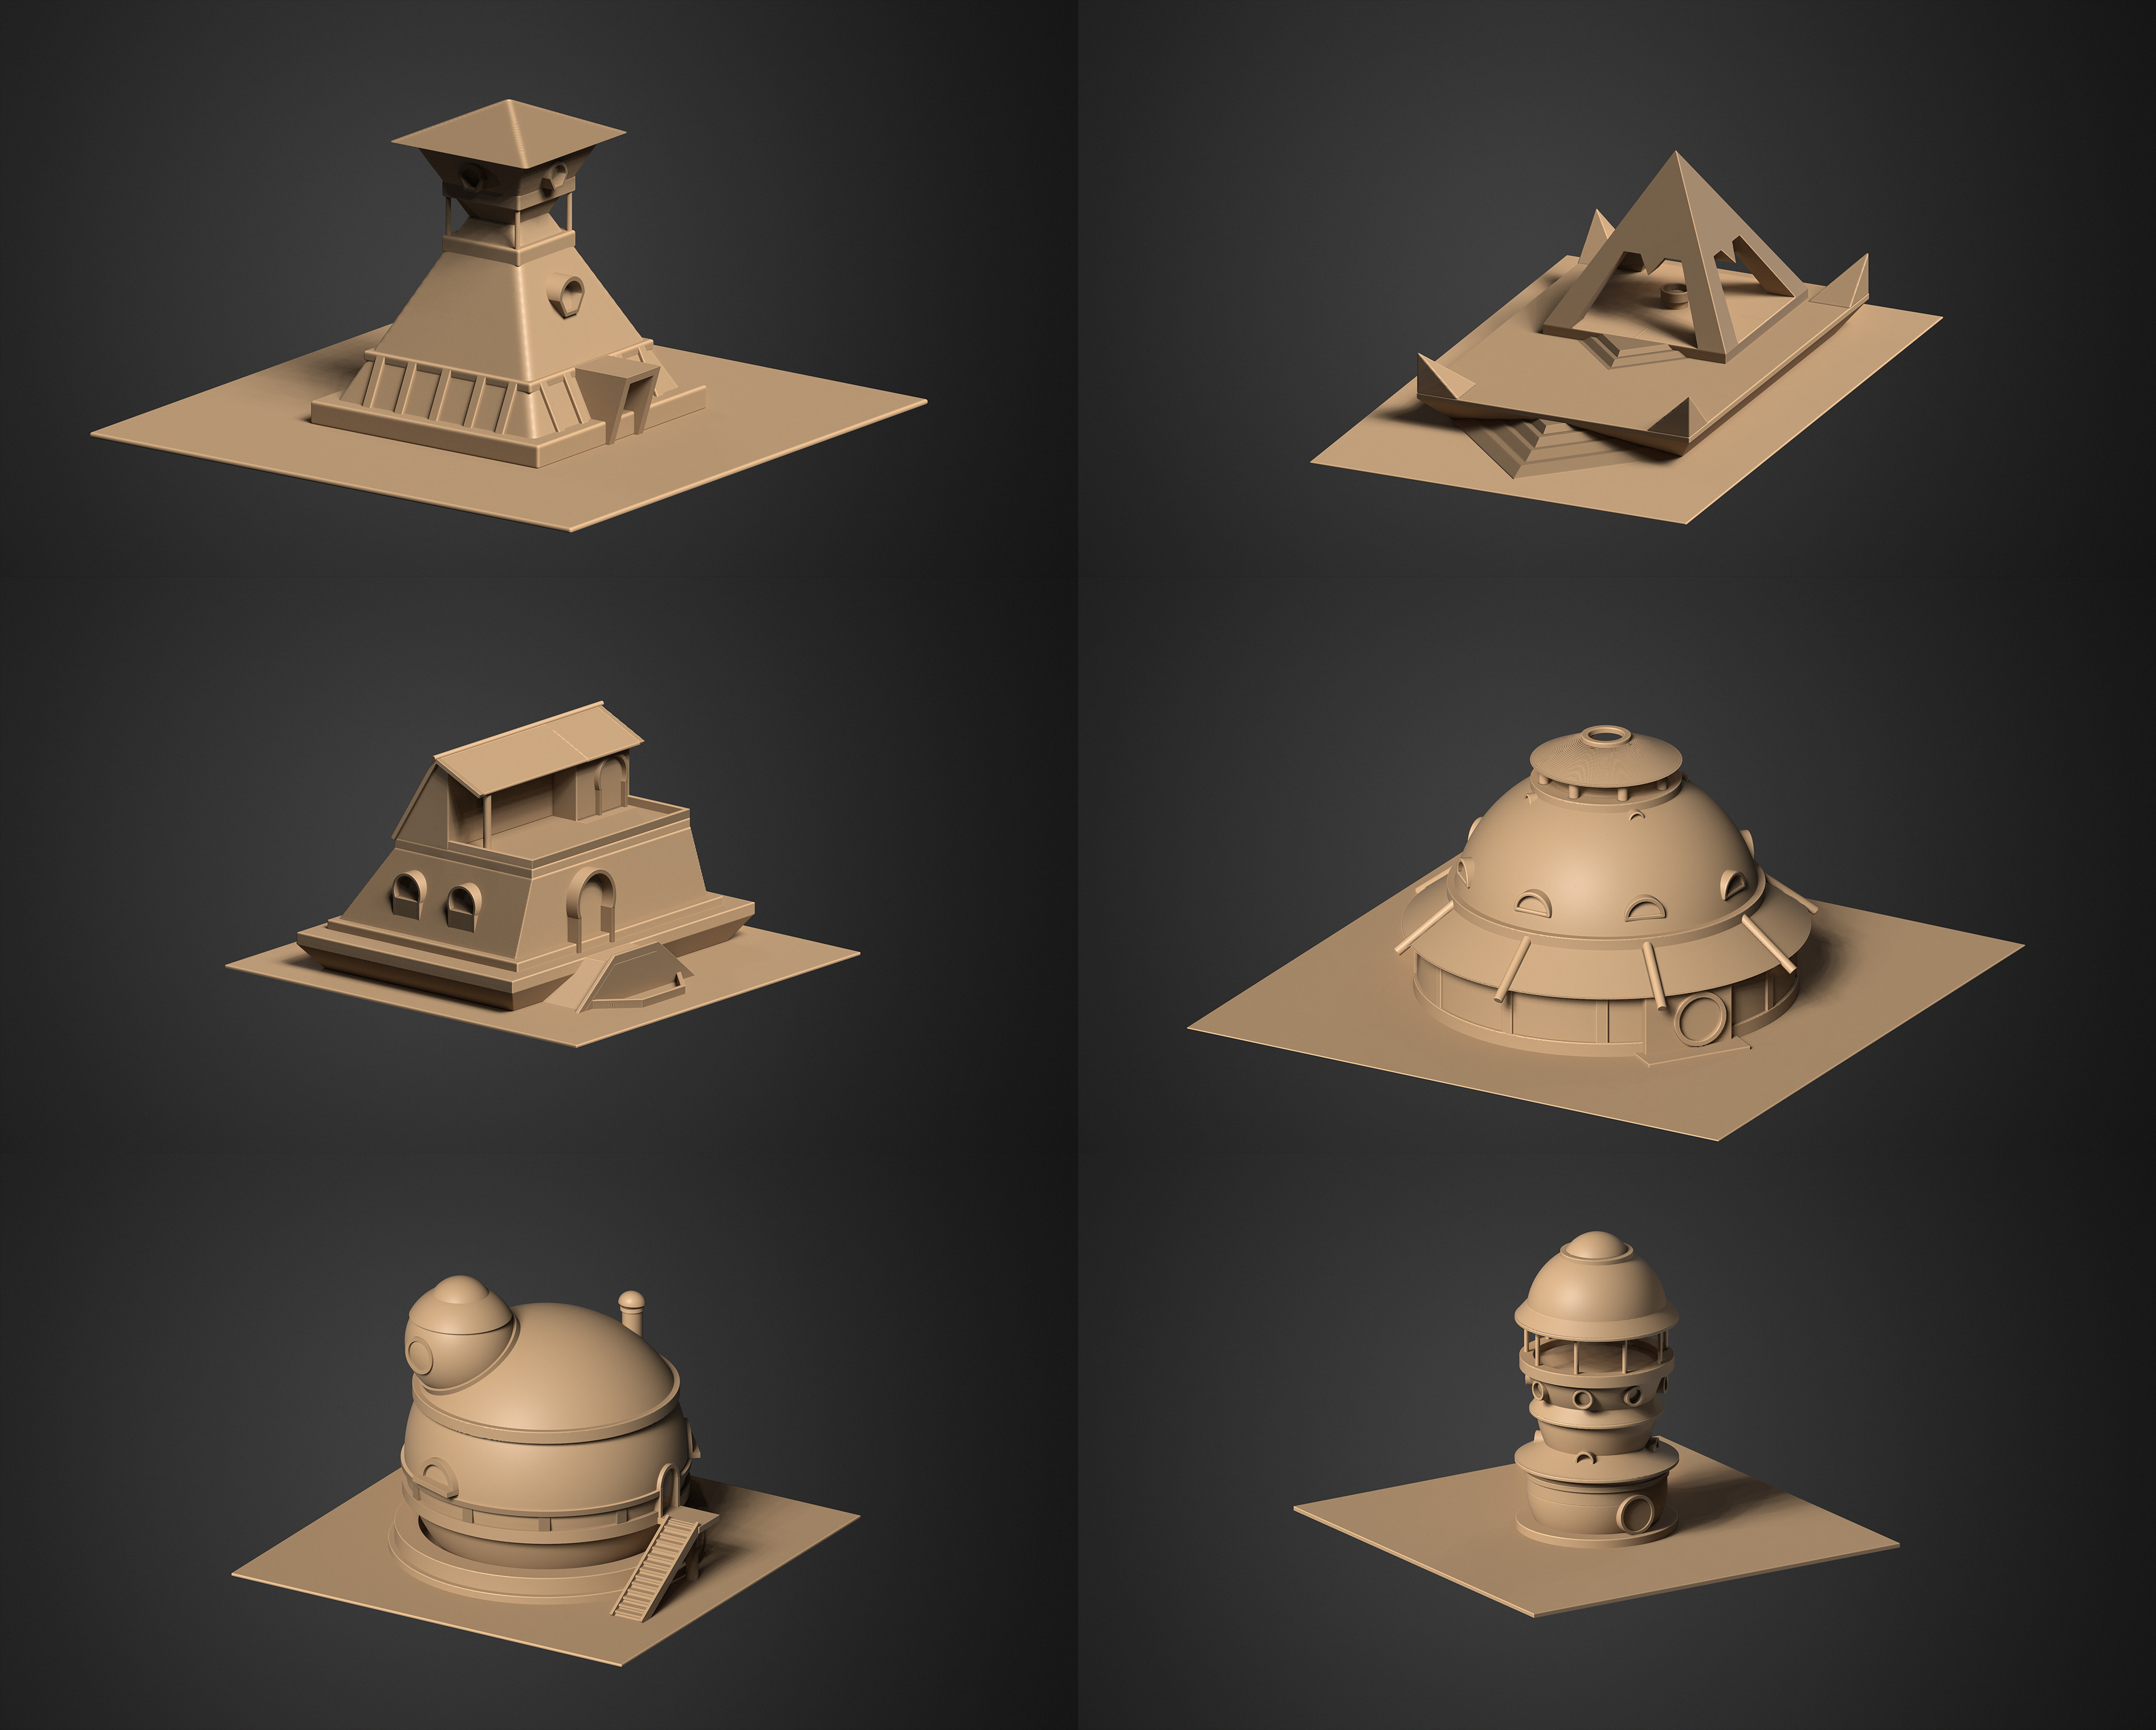 3D bases for the buildings. All done in 3DCoat